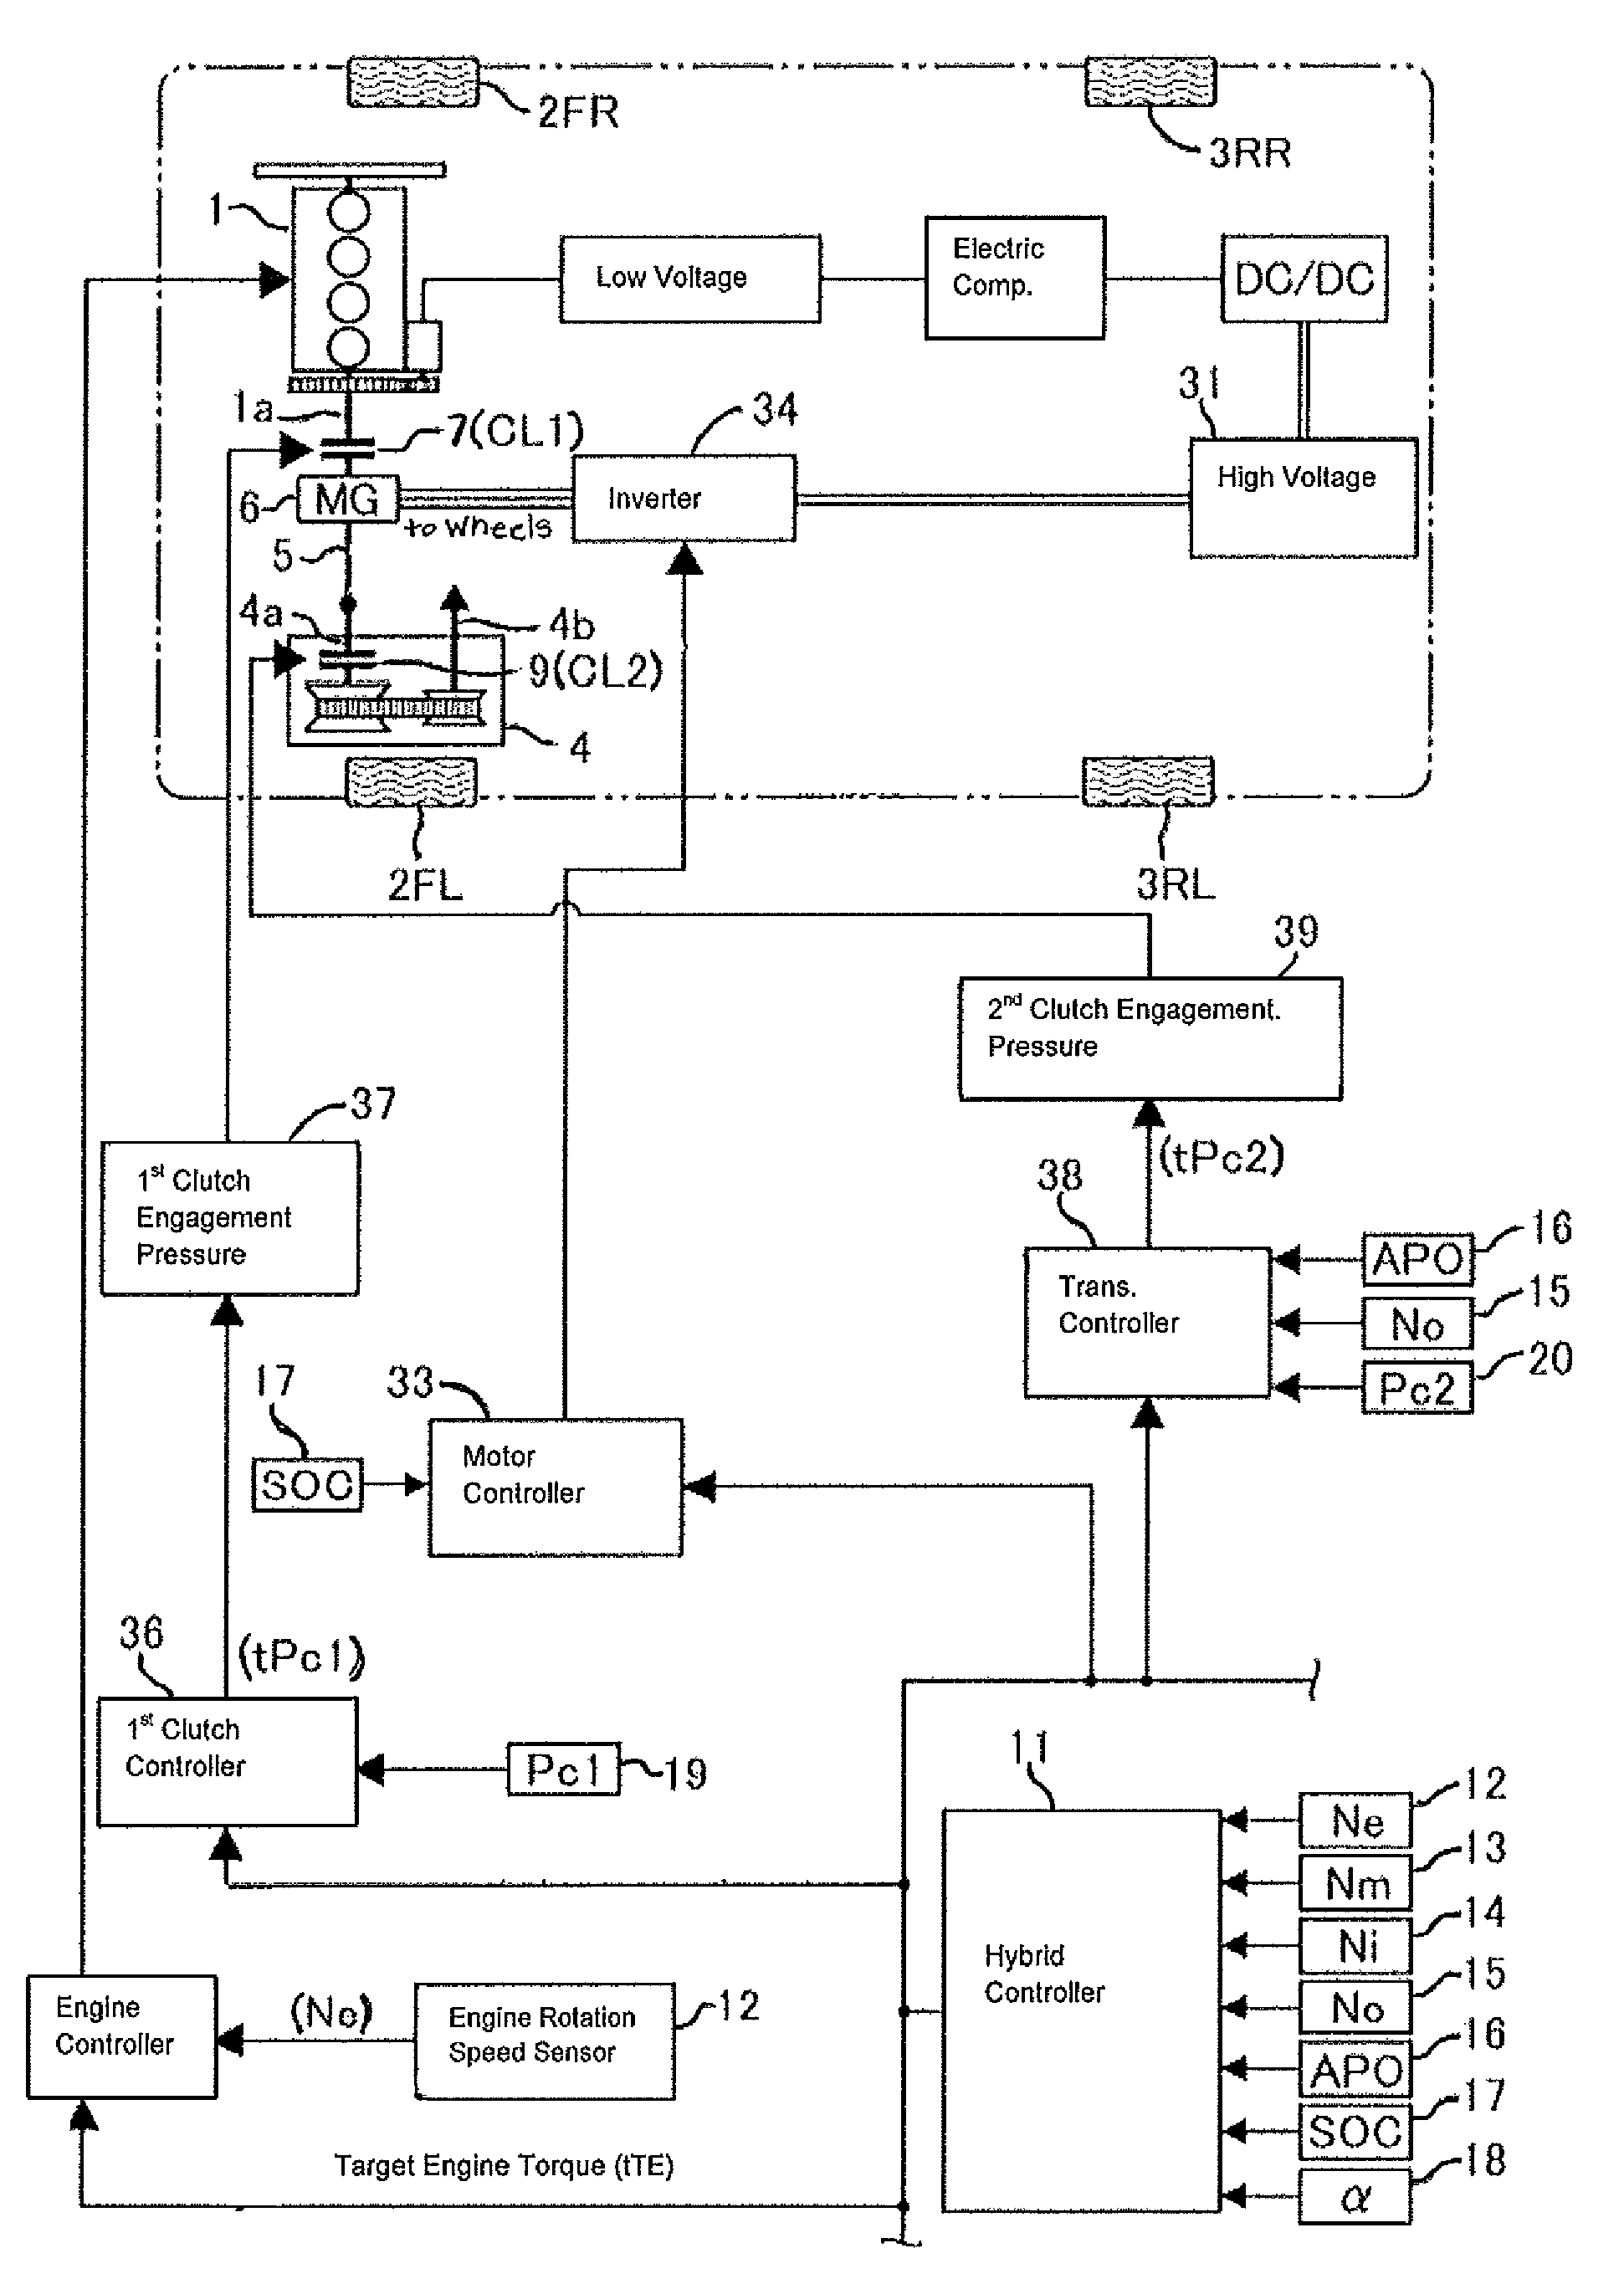 Engine start control system for hybrid electric vehicle